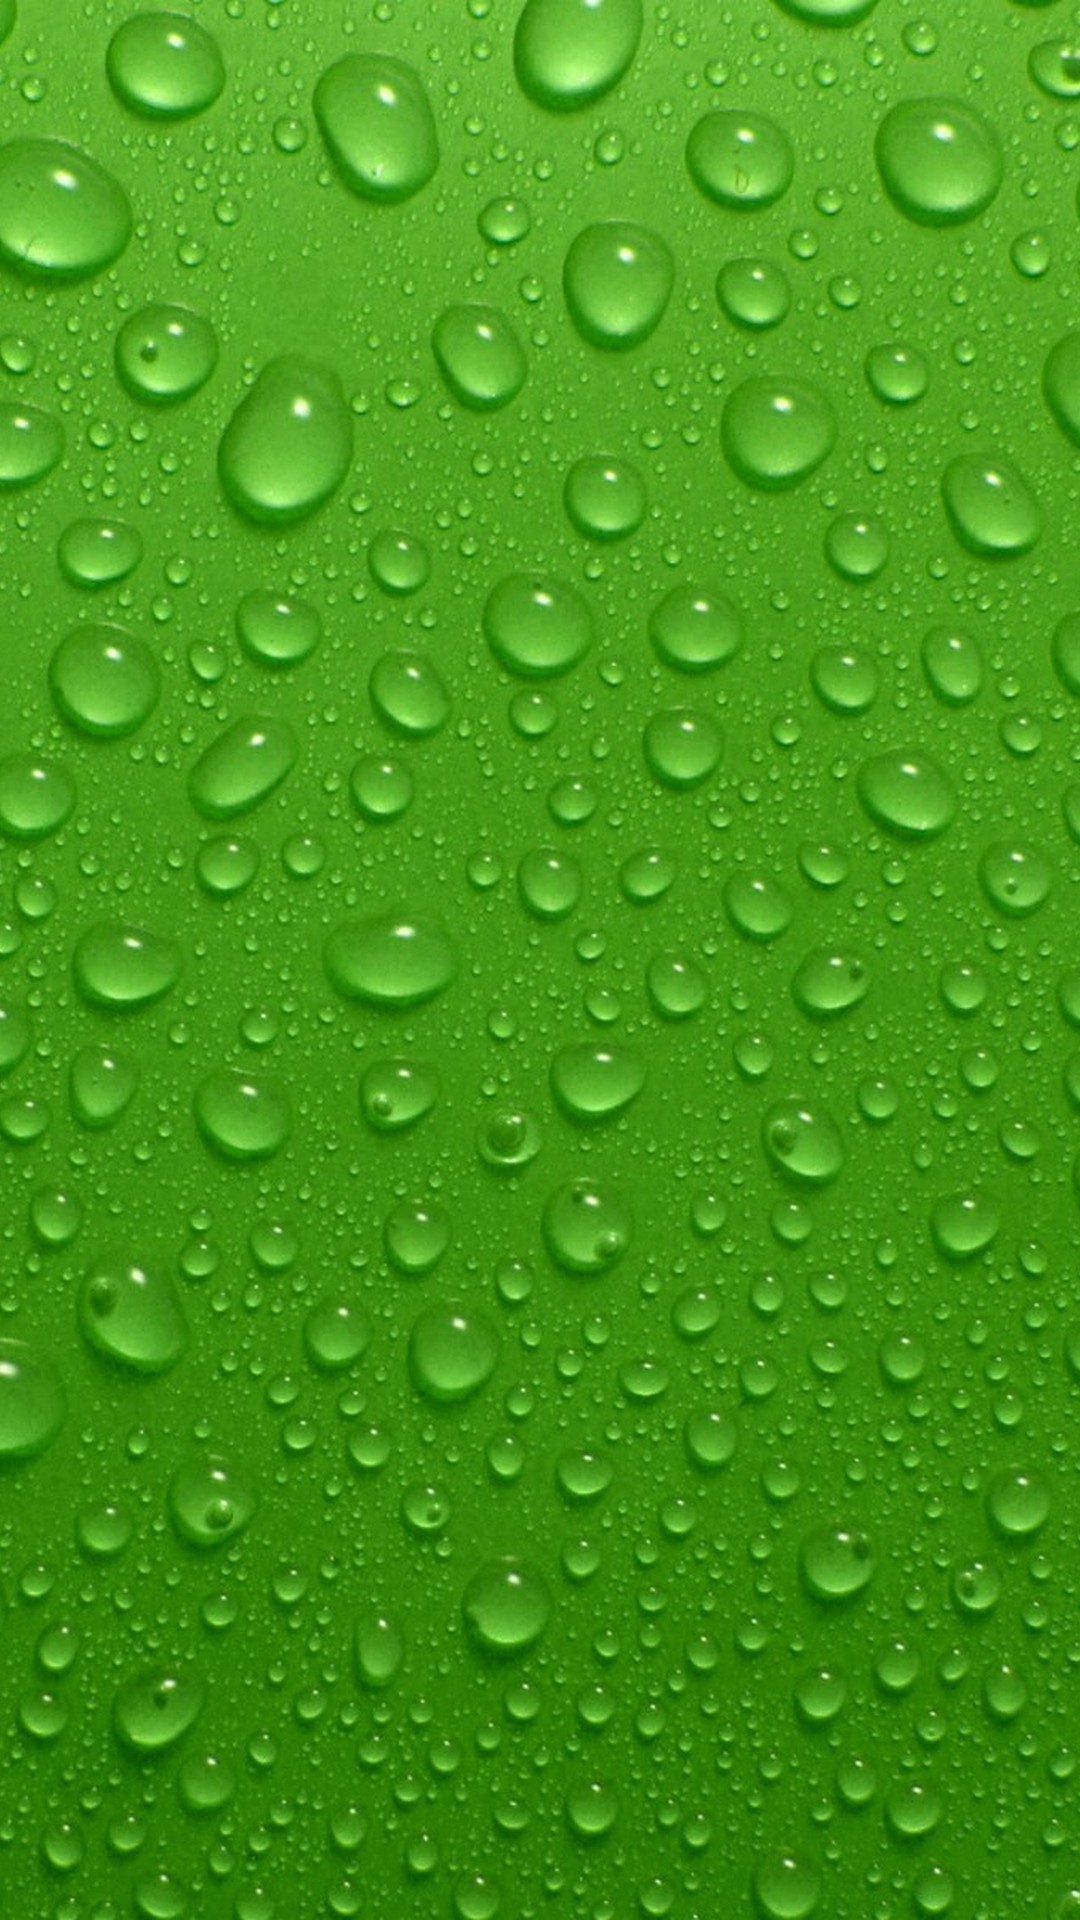 Wallpaper Android Dark Green With Image Resolution - Green Drops - HD Wallpaper 